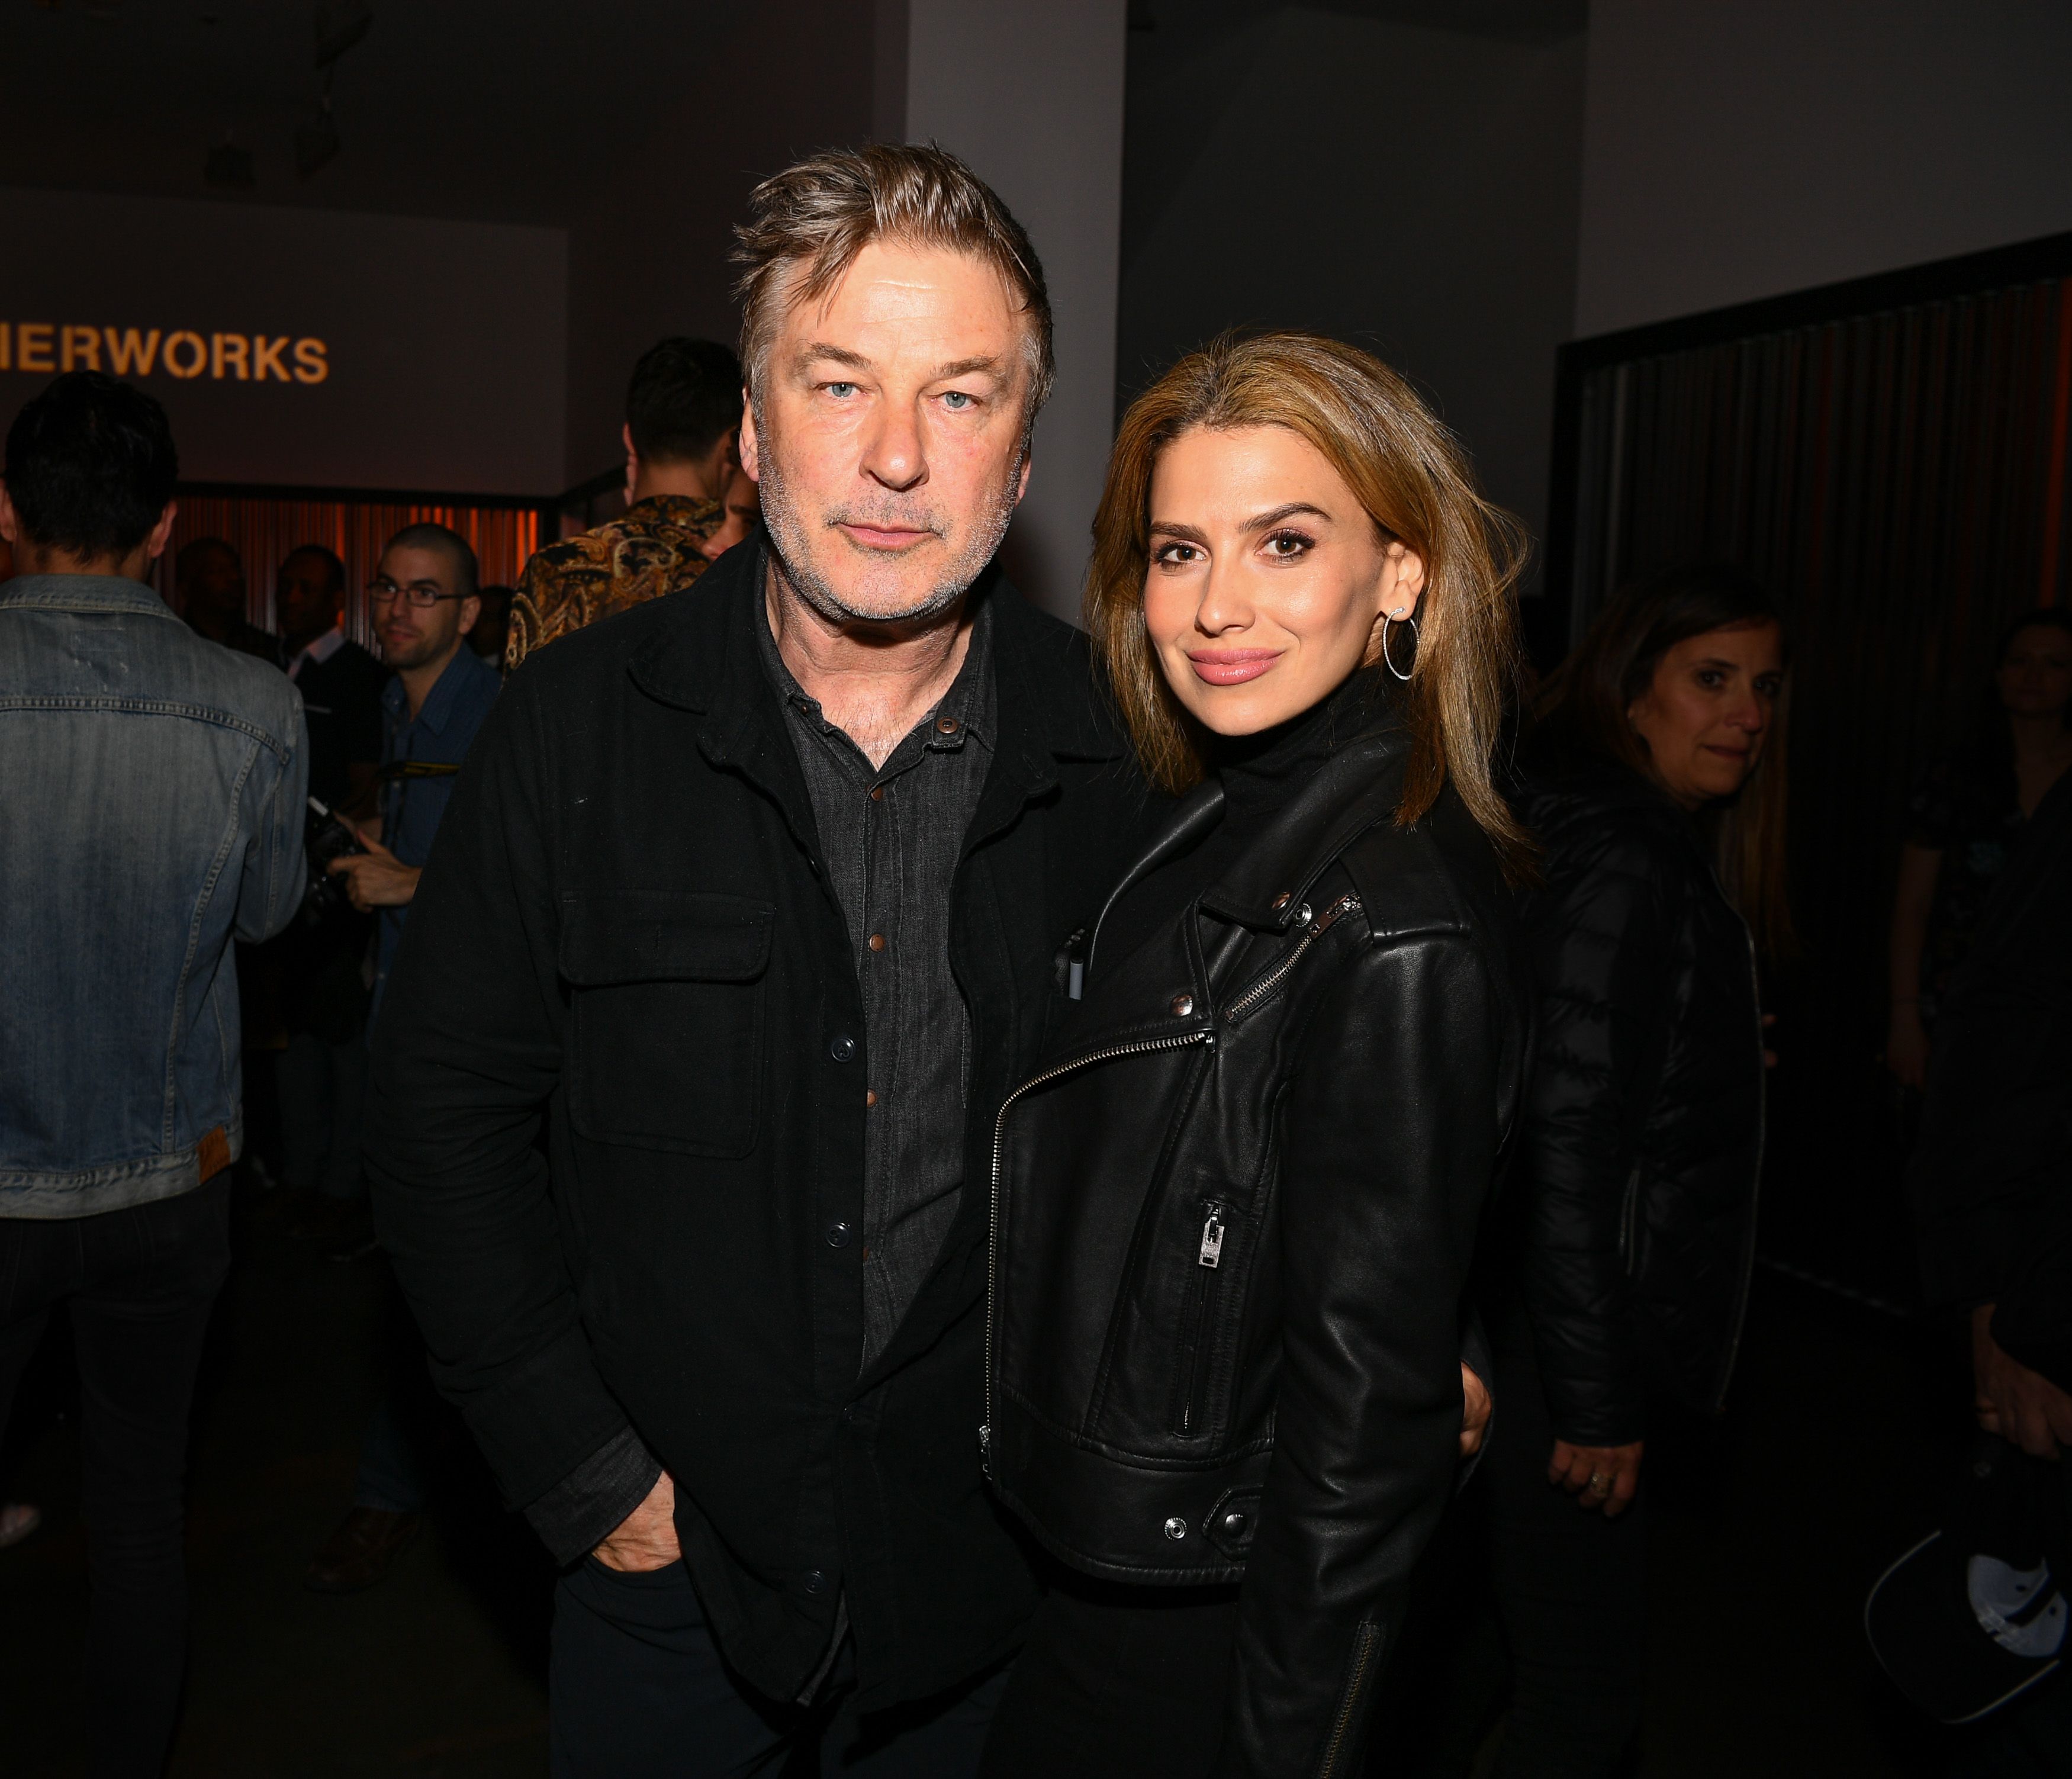 Alec and Hilaria Baldwin at the Tribeca Film Festival After-Party on April 26, 2019 | Photo: Getty Images